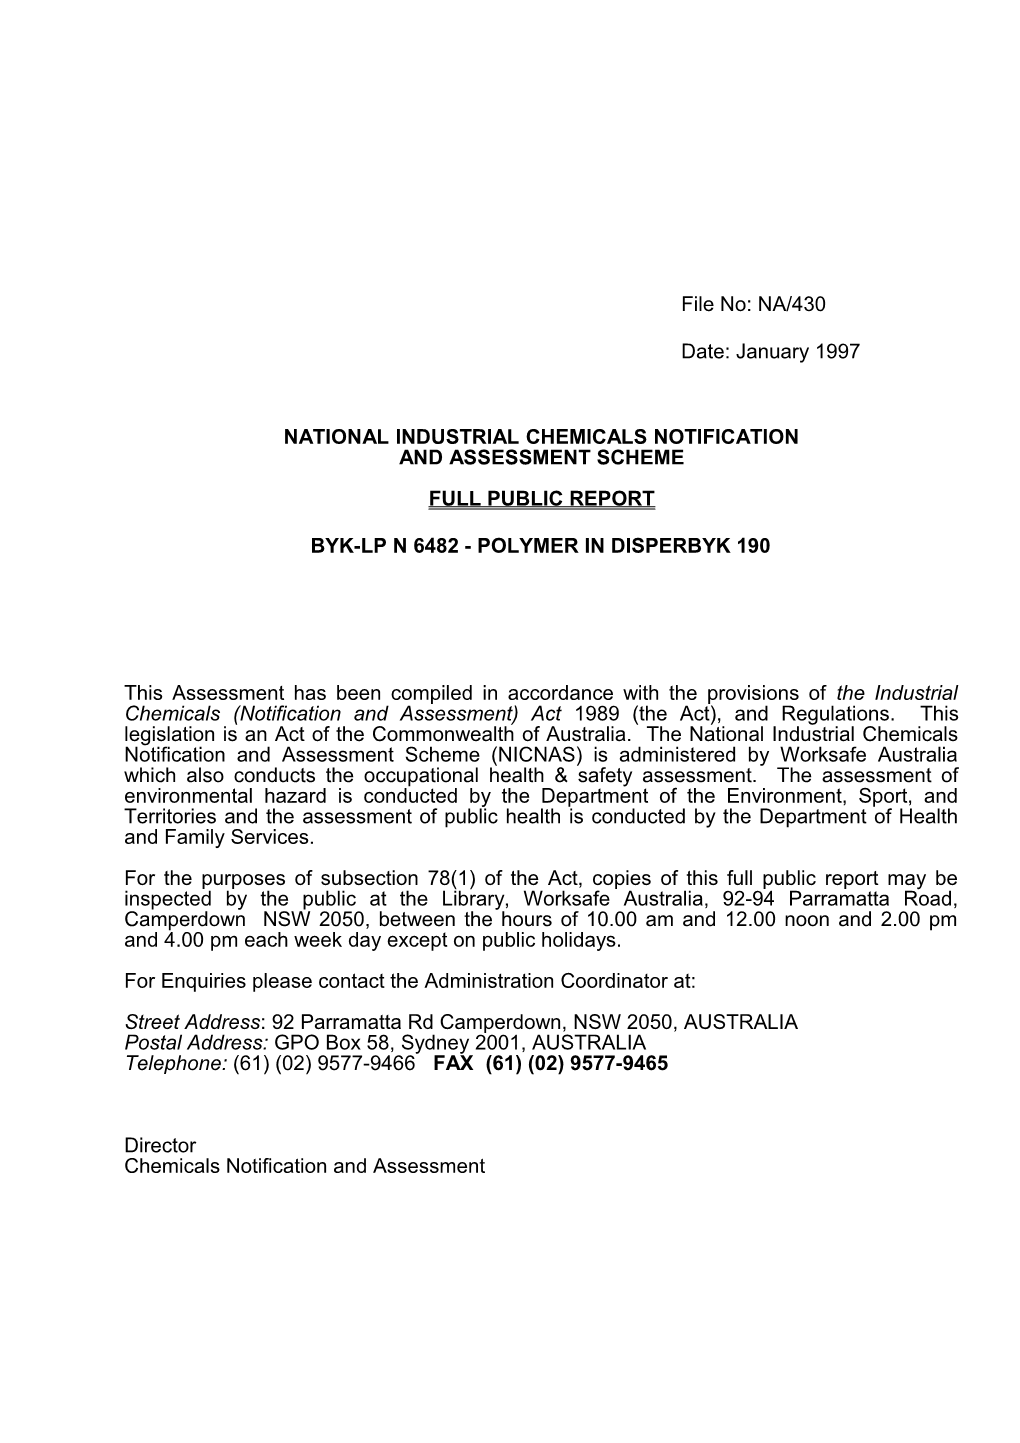 National Industrial Chemicals Notification s5